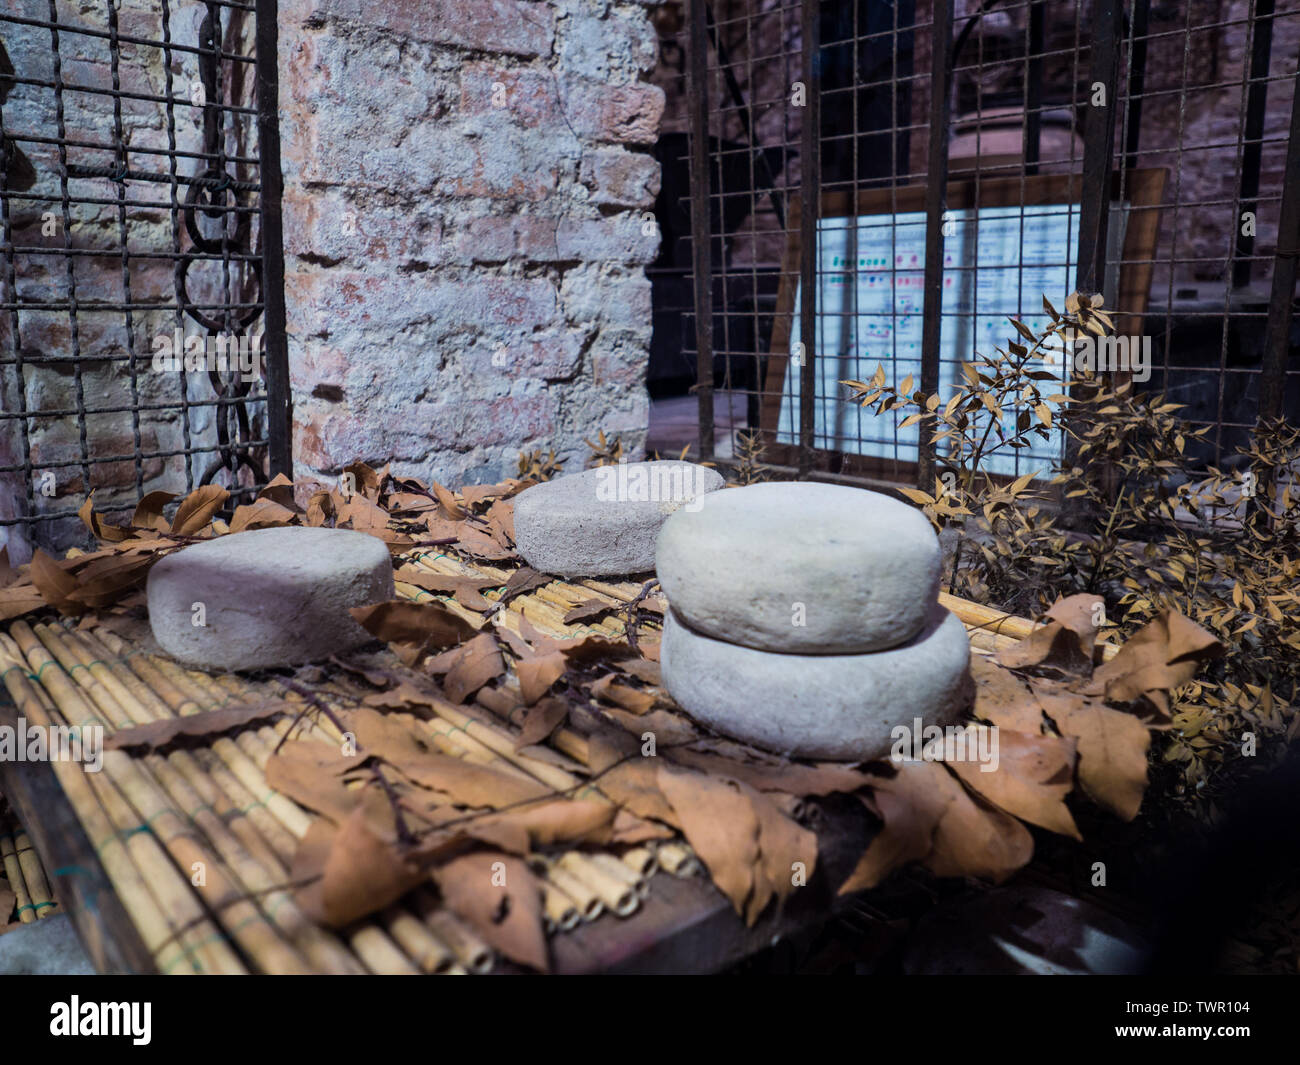 Cheese maturing in an Italian ancient stone cellar. Stock Photo